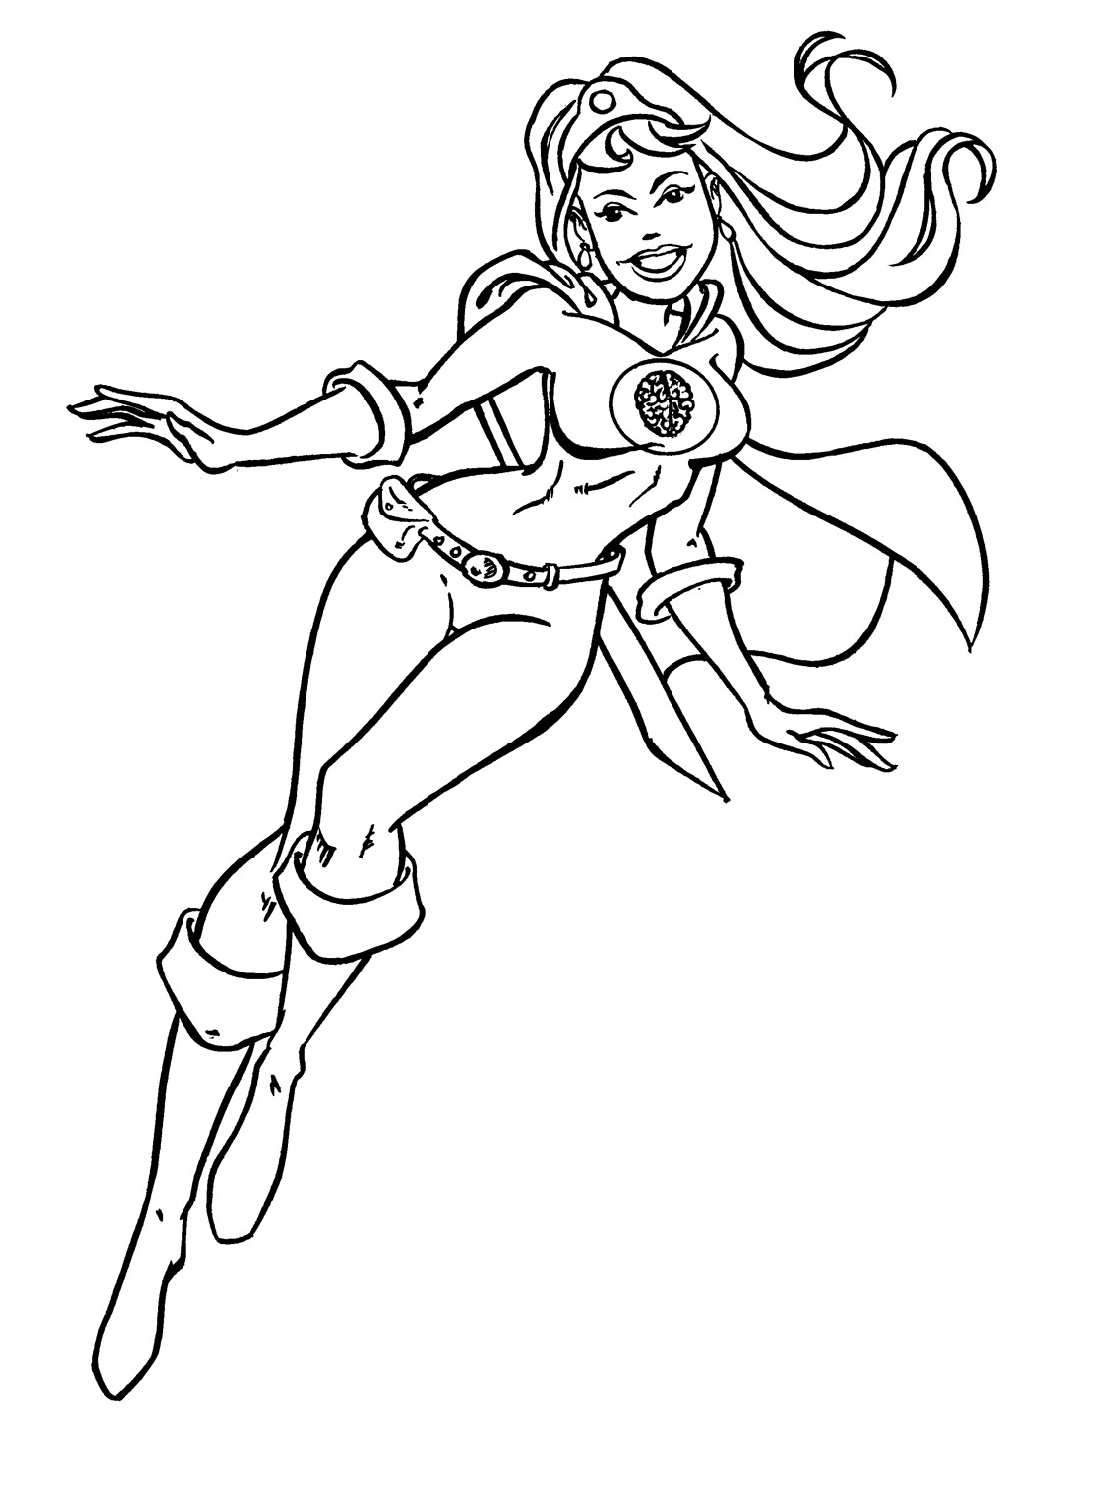 Female Superhero Coloring Pages Printable